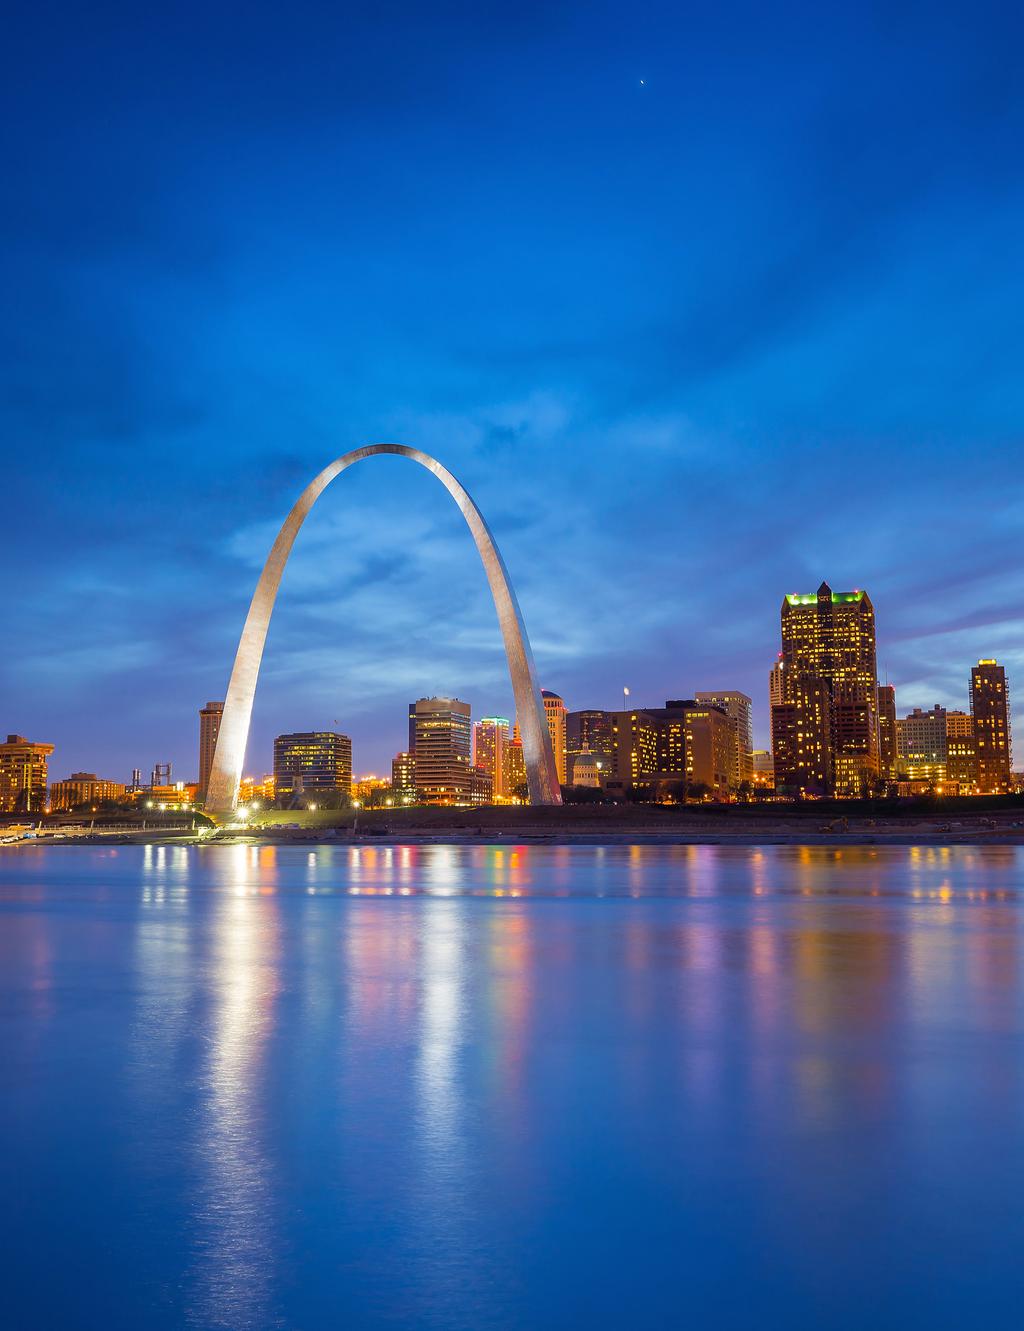 Conclusion St. Louis is remaking itself again. The next chapter begins with the revitalization of historic neighborhoods and the welcoming of new energy in the form of startups.